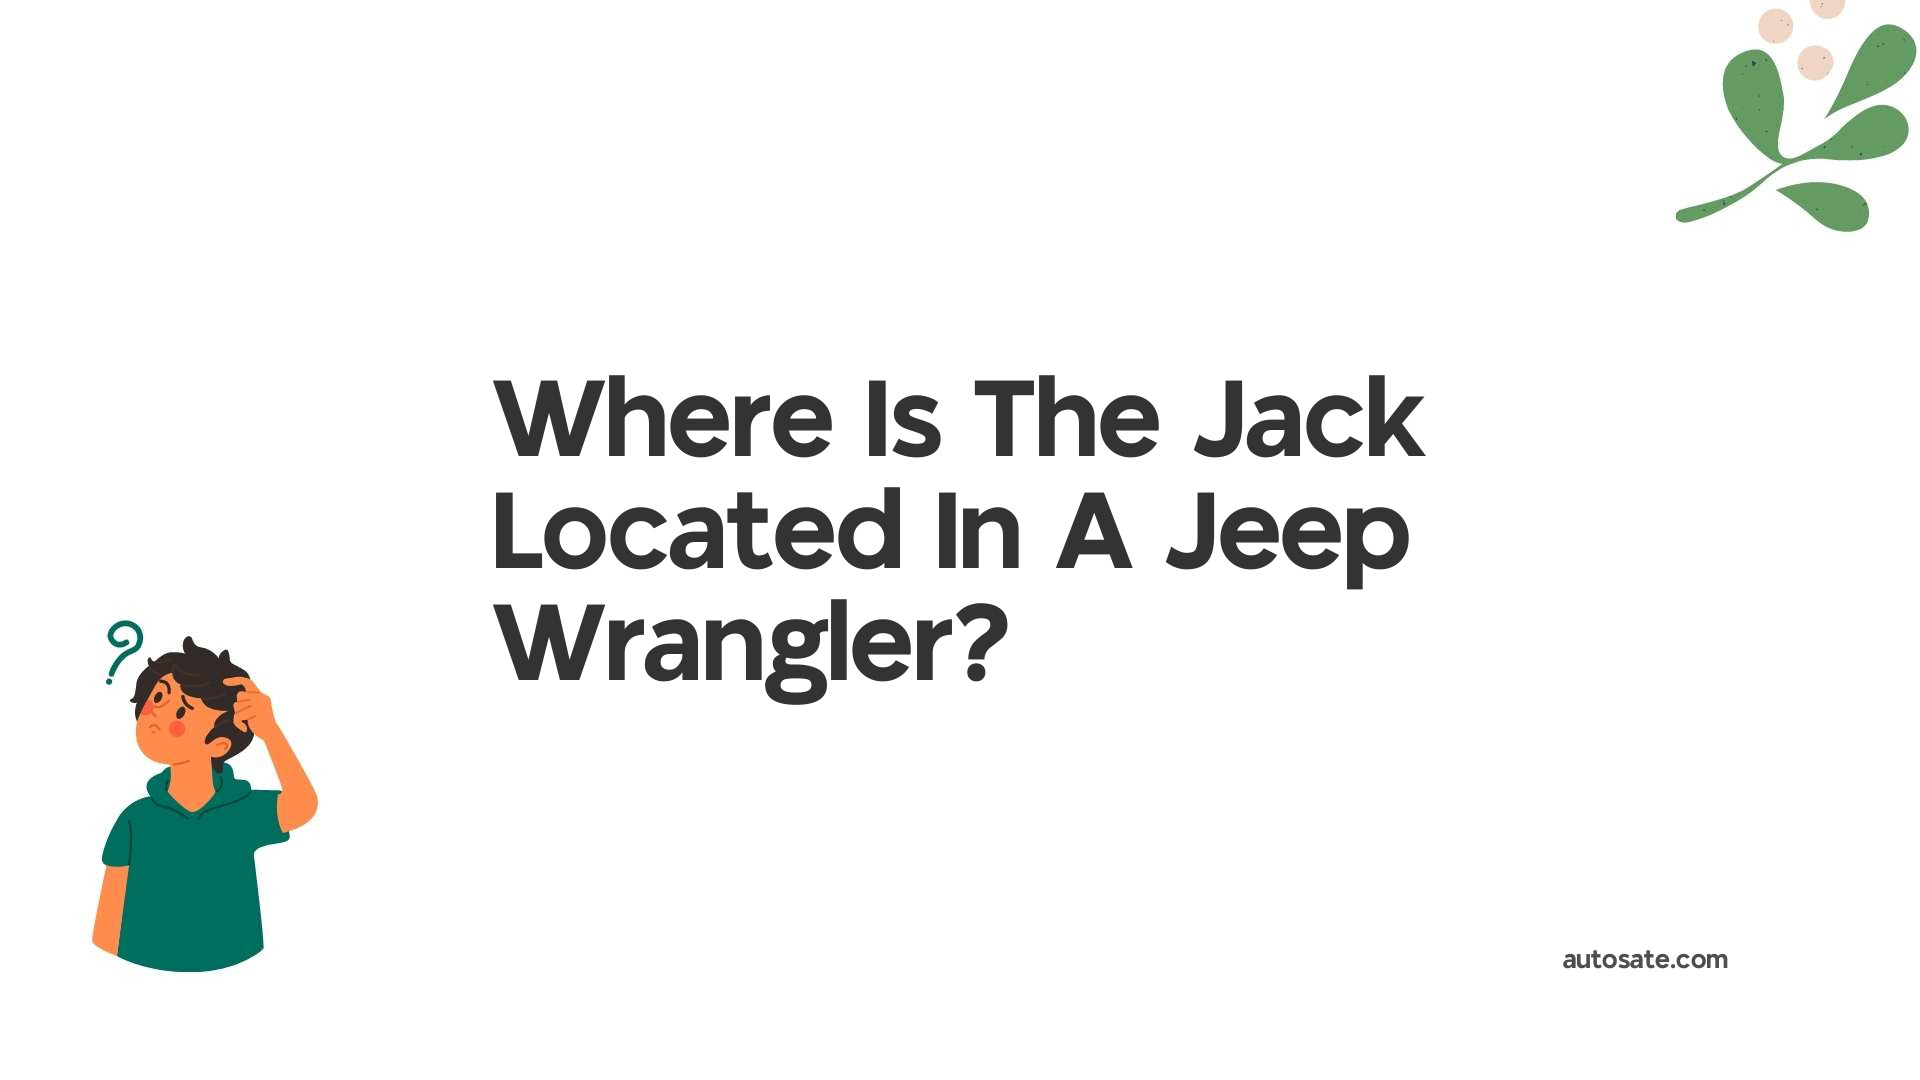 Where Is The Jack Located In A Jeep Wrangler?